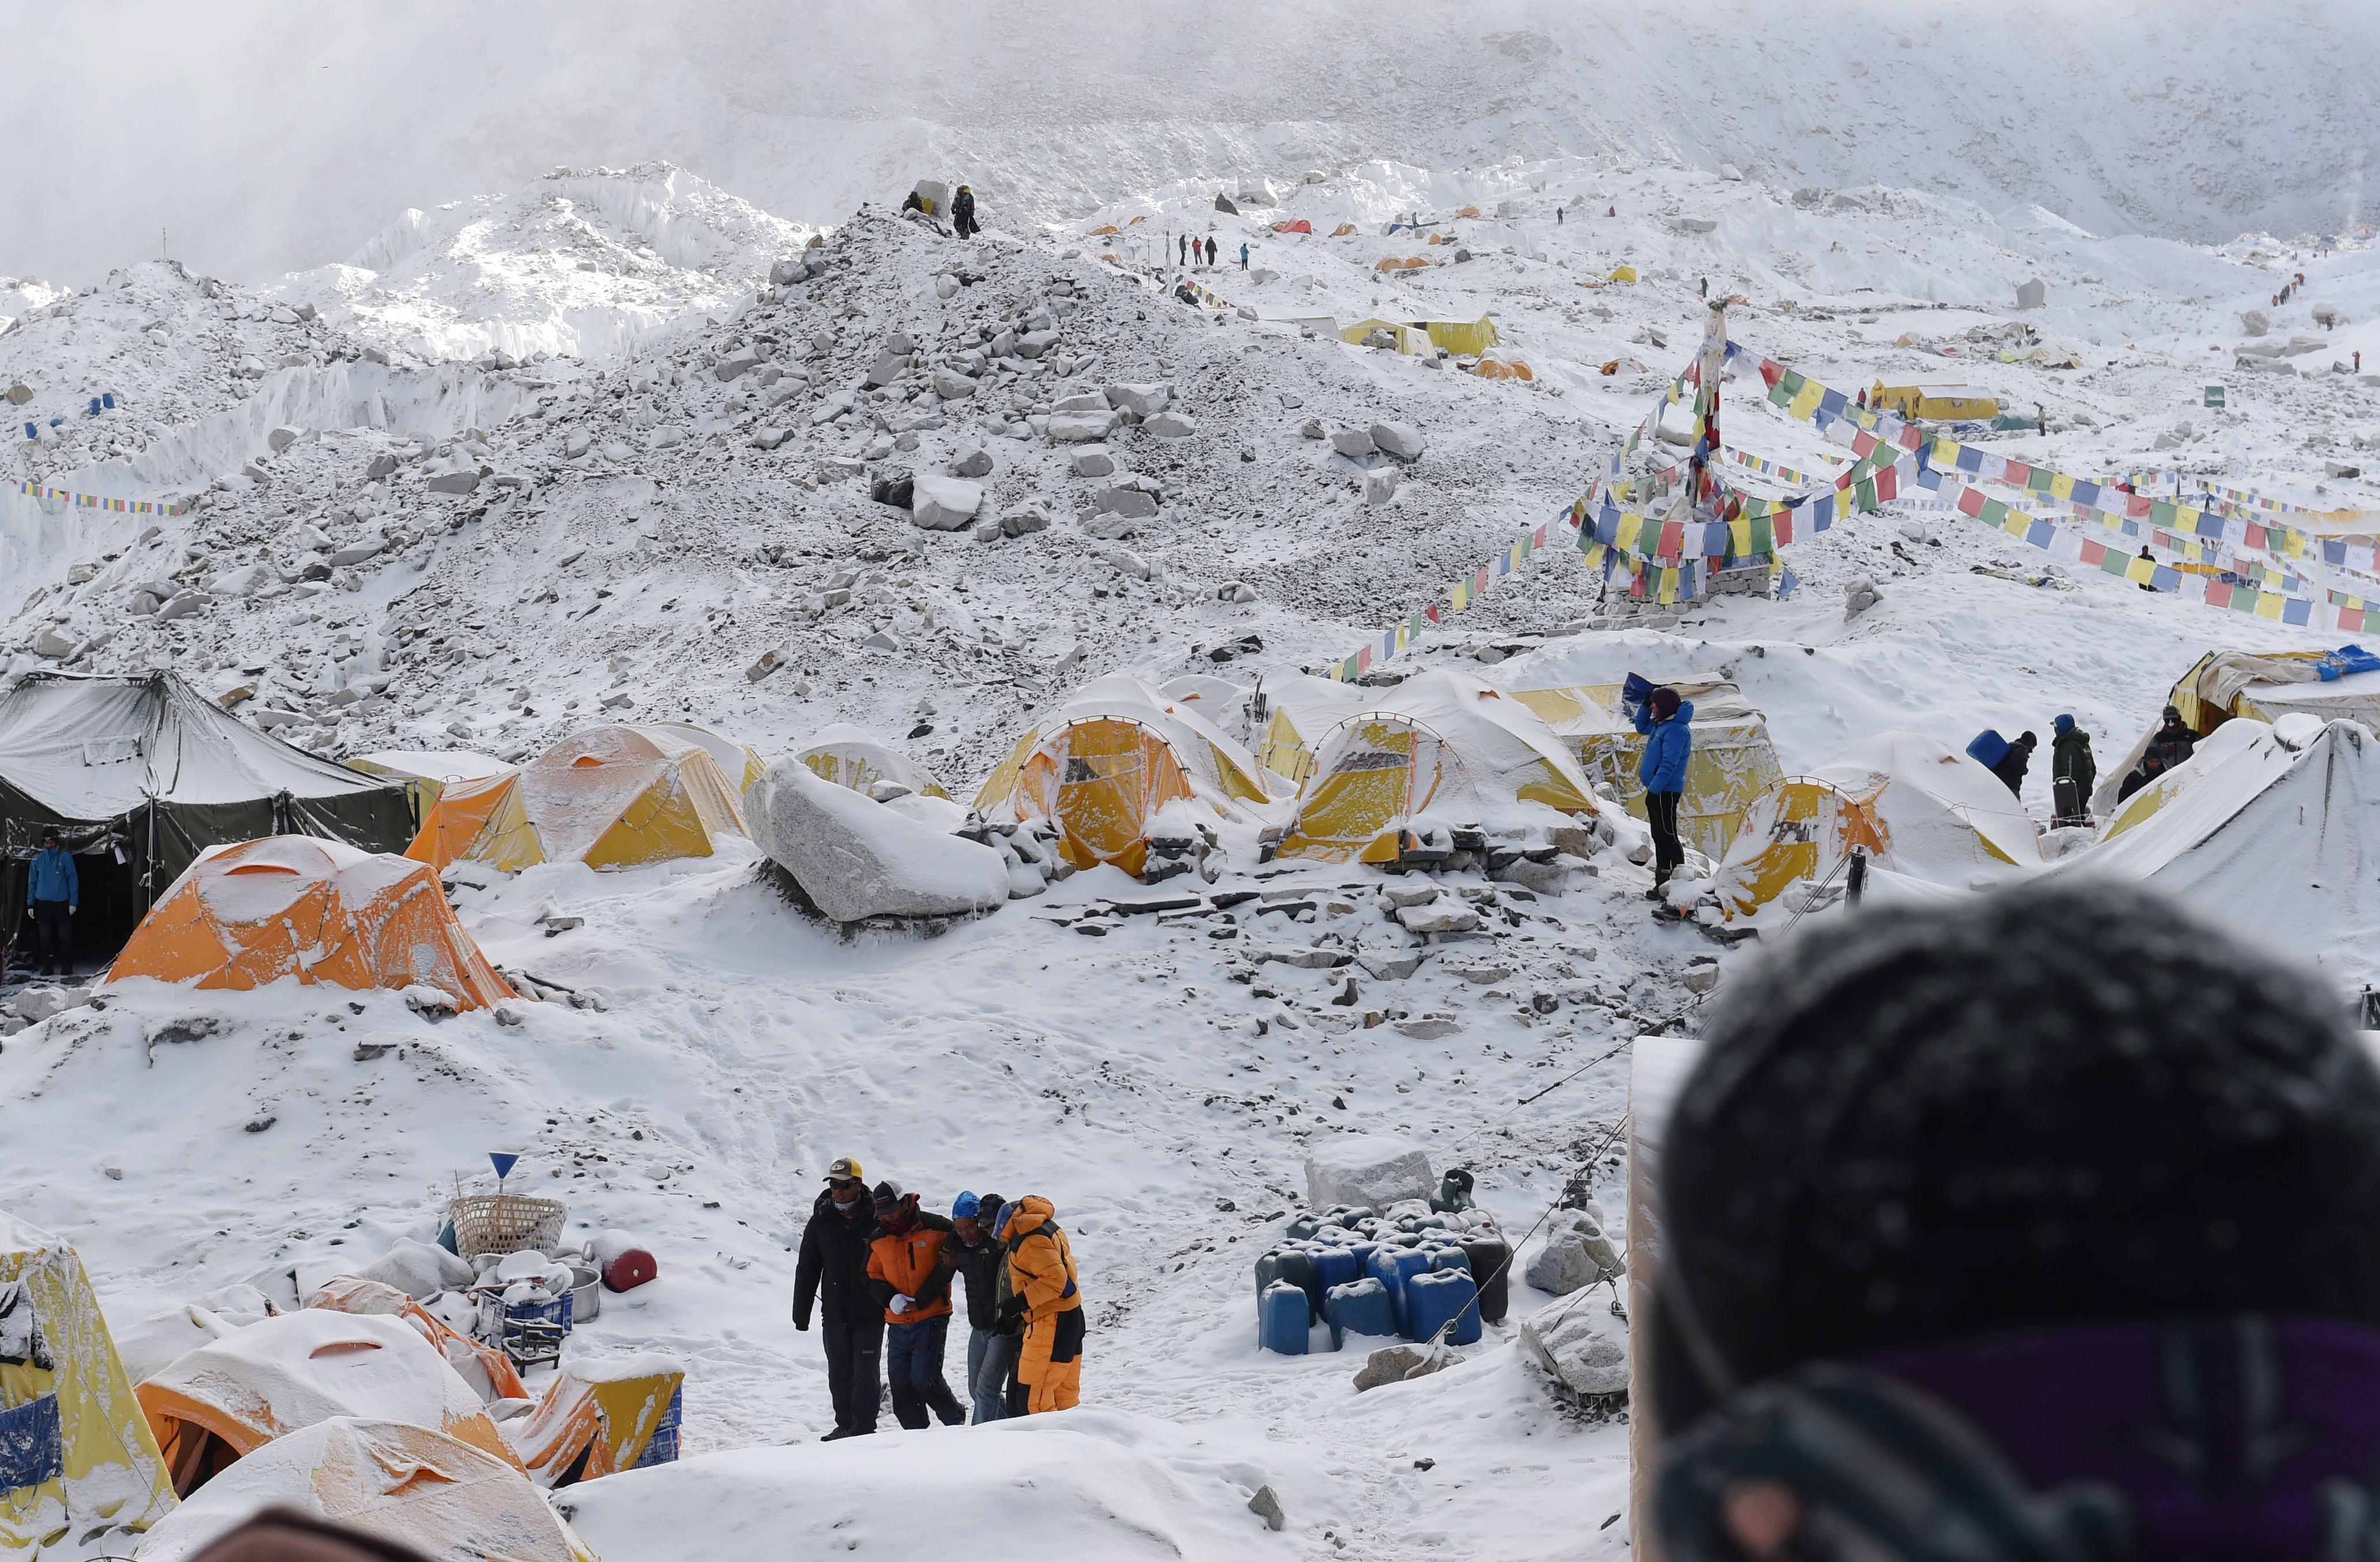 An injured person is helped to a landing area to be loaded onto a rescue helicopter at Everest Base Camp on April 26, 2015, a day after an avalanche triggered by an earthquake devastated the camp. Rescuers in Nepal are searching frantically for survivors of a huge quake on April 25, that killed nearly 2,000, digging through rubble in the devastated capital Kathmandu and airlifting victims of an avalanche at Everest base Camp. The bodies of those who perished lie under orange tents. AFP PHOTO/ROBERTO SCHMIDT